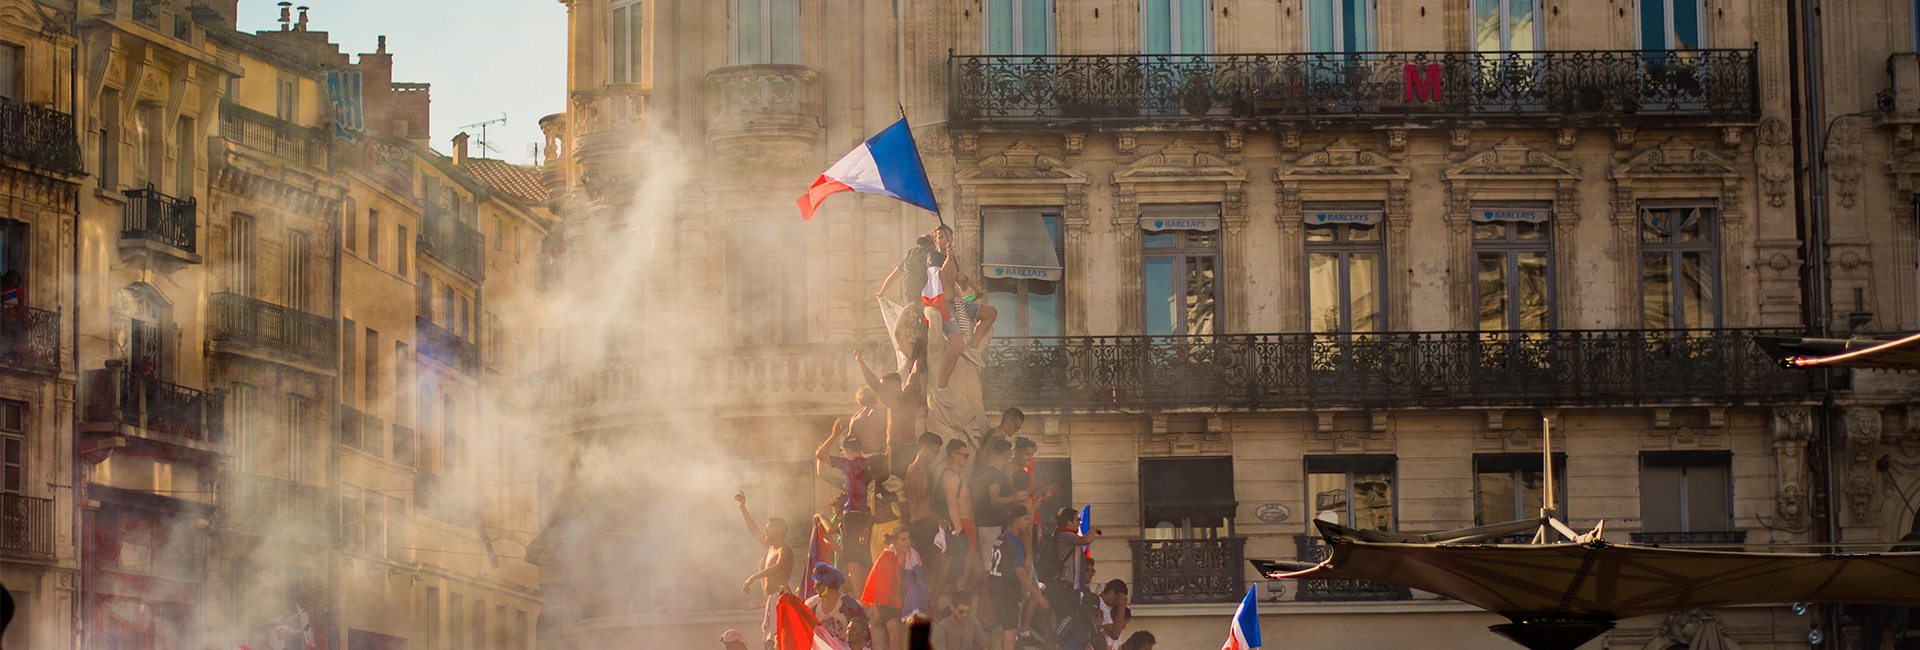 people-climbing-on-fountain-waving-french-flag